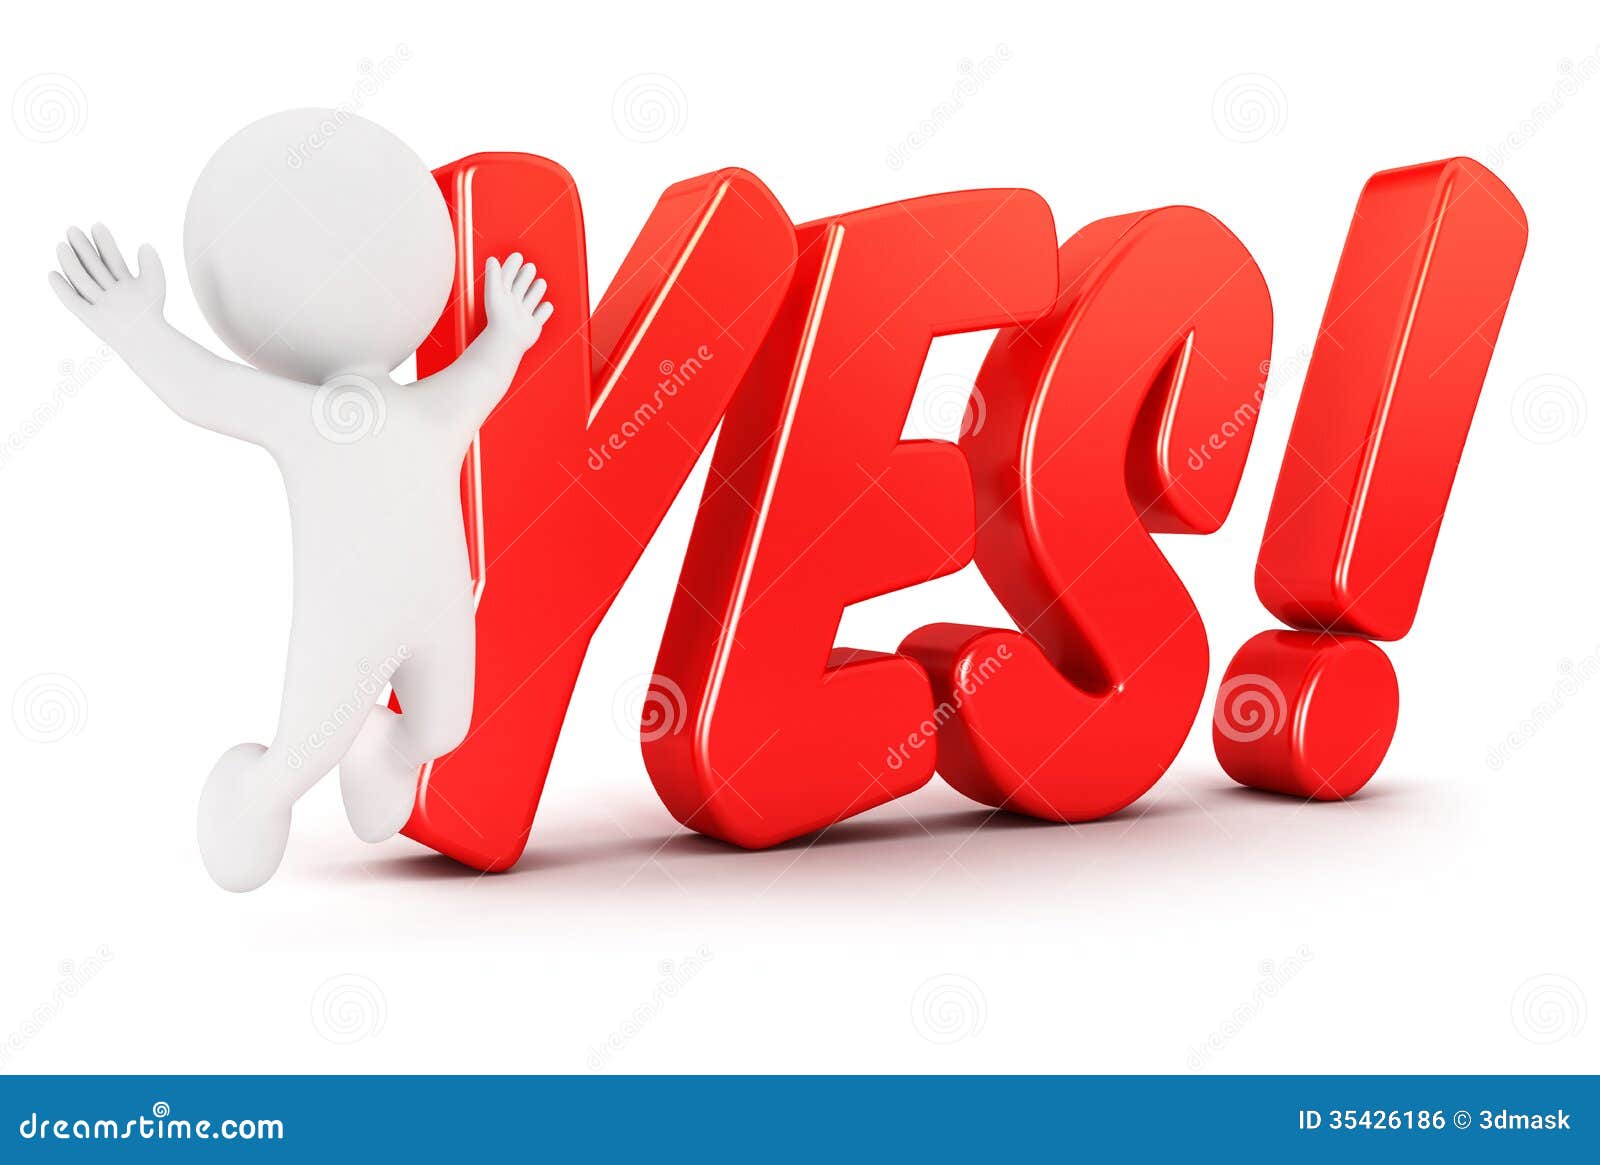 yes no clipart free - photo #45